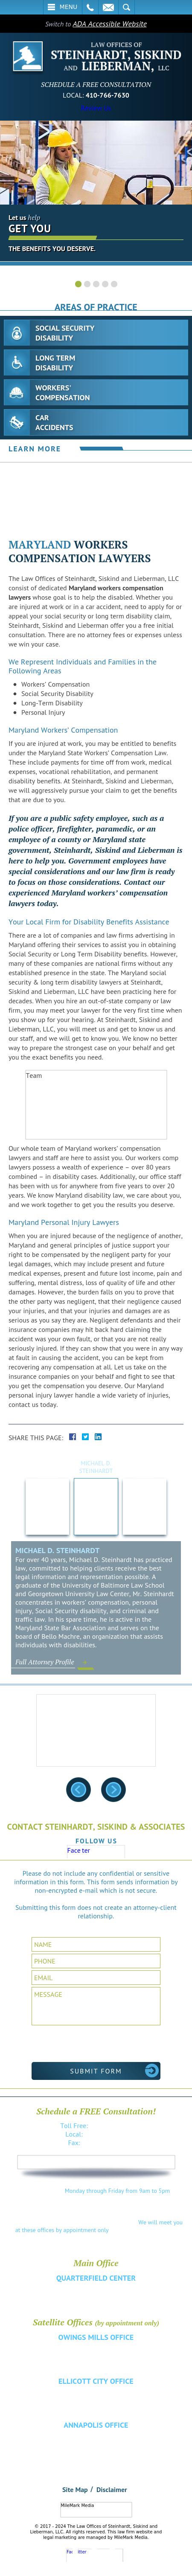 The Law Offices of Steinhardt, Siskind and Associates, LLC - Glen Burnie MD Lawyers